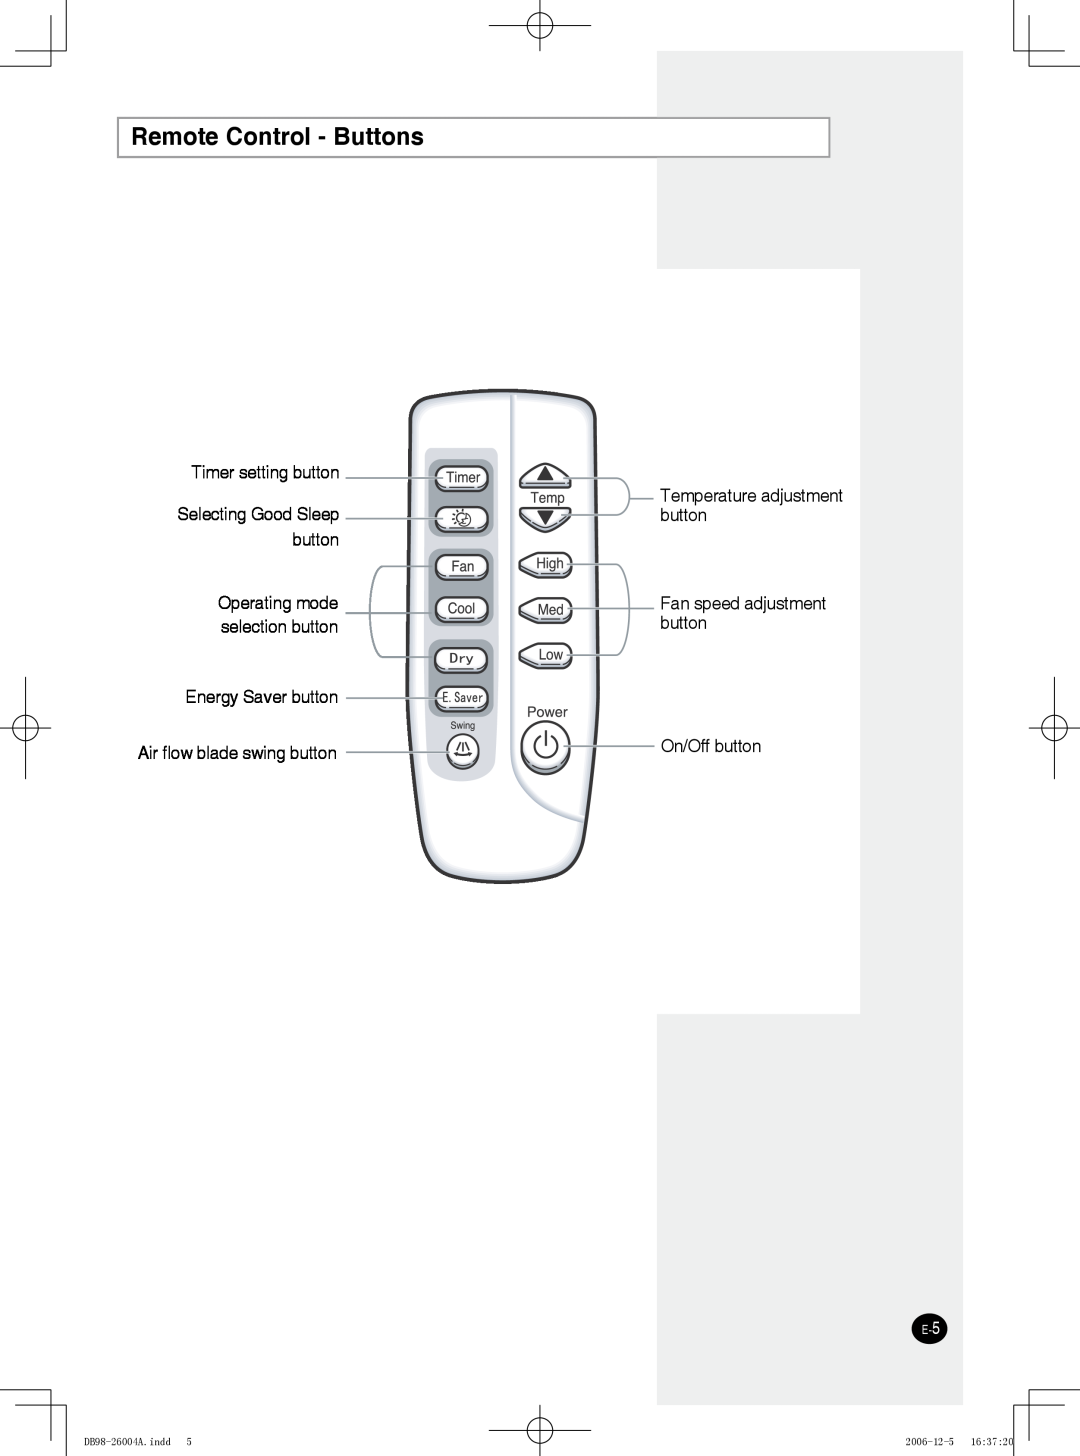 Samsung AW18PK Series, AW10PK Series, AW12PK Series, AW12PH Series, AW10PH Series, AW18PH Series Remote Control - Buttons 